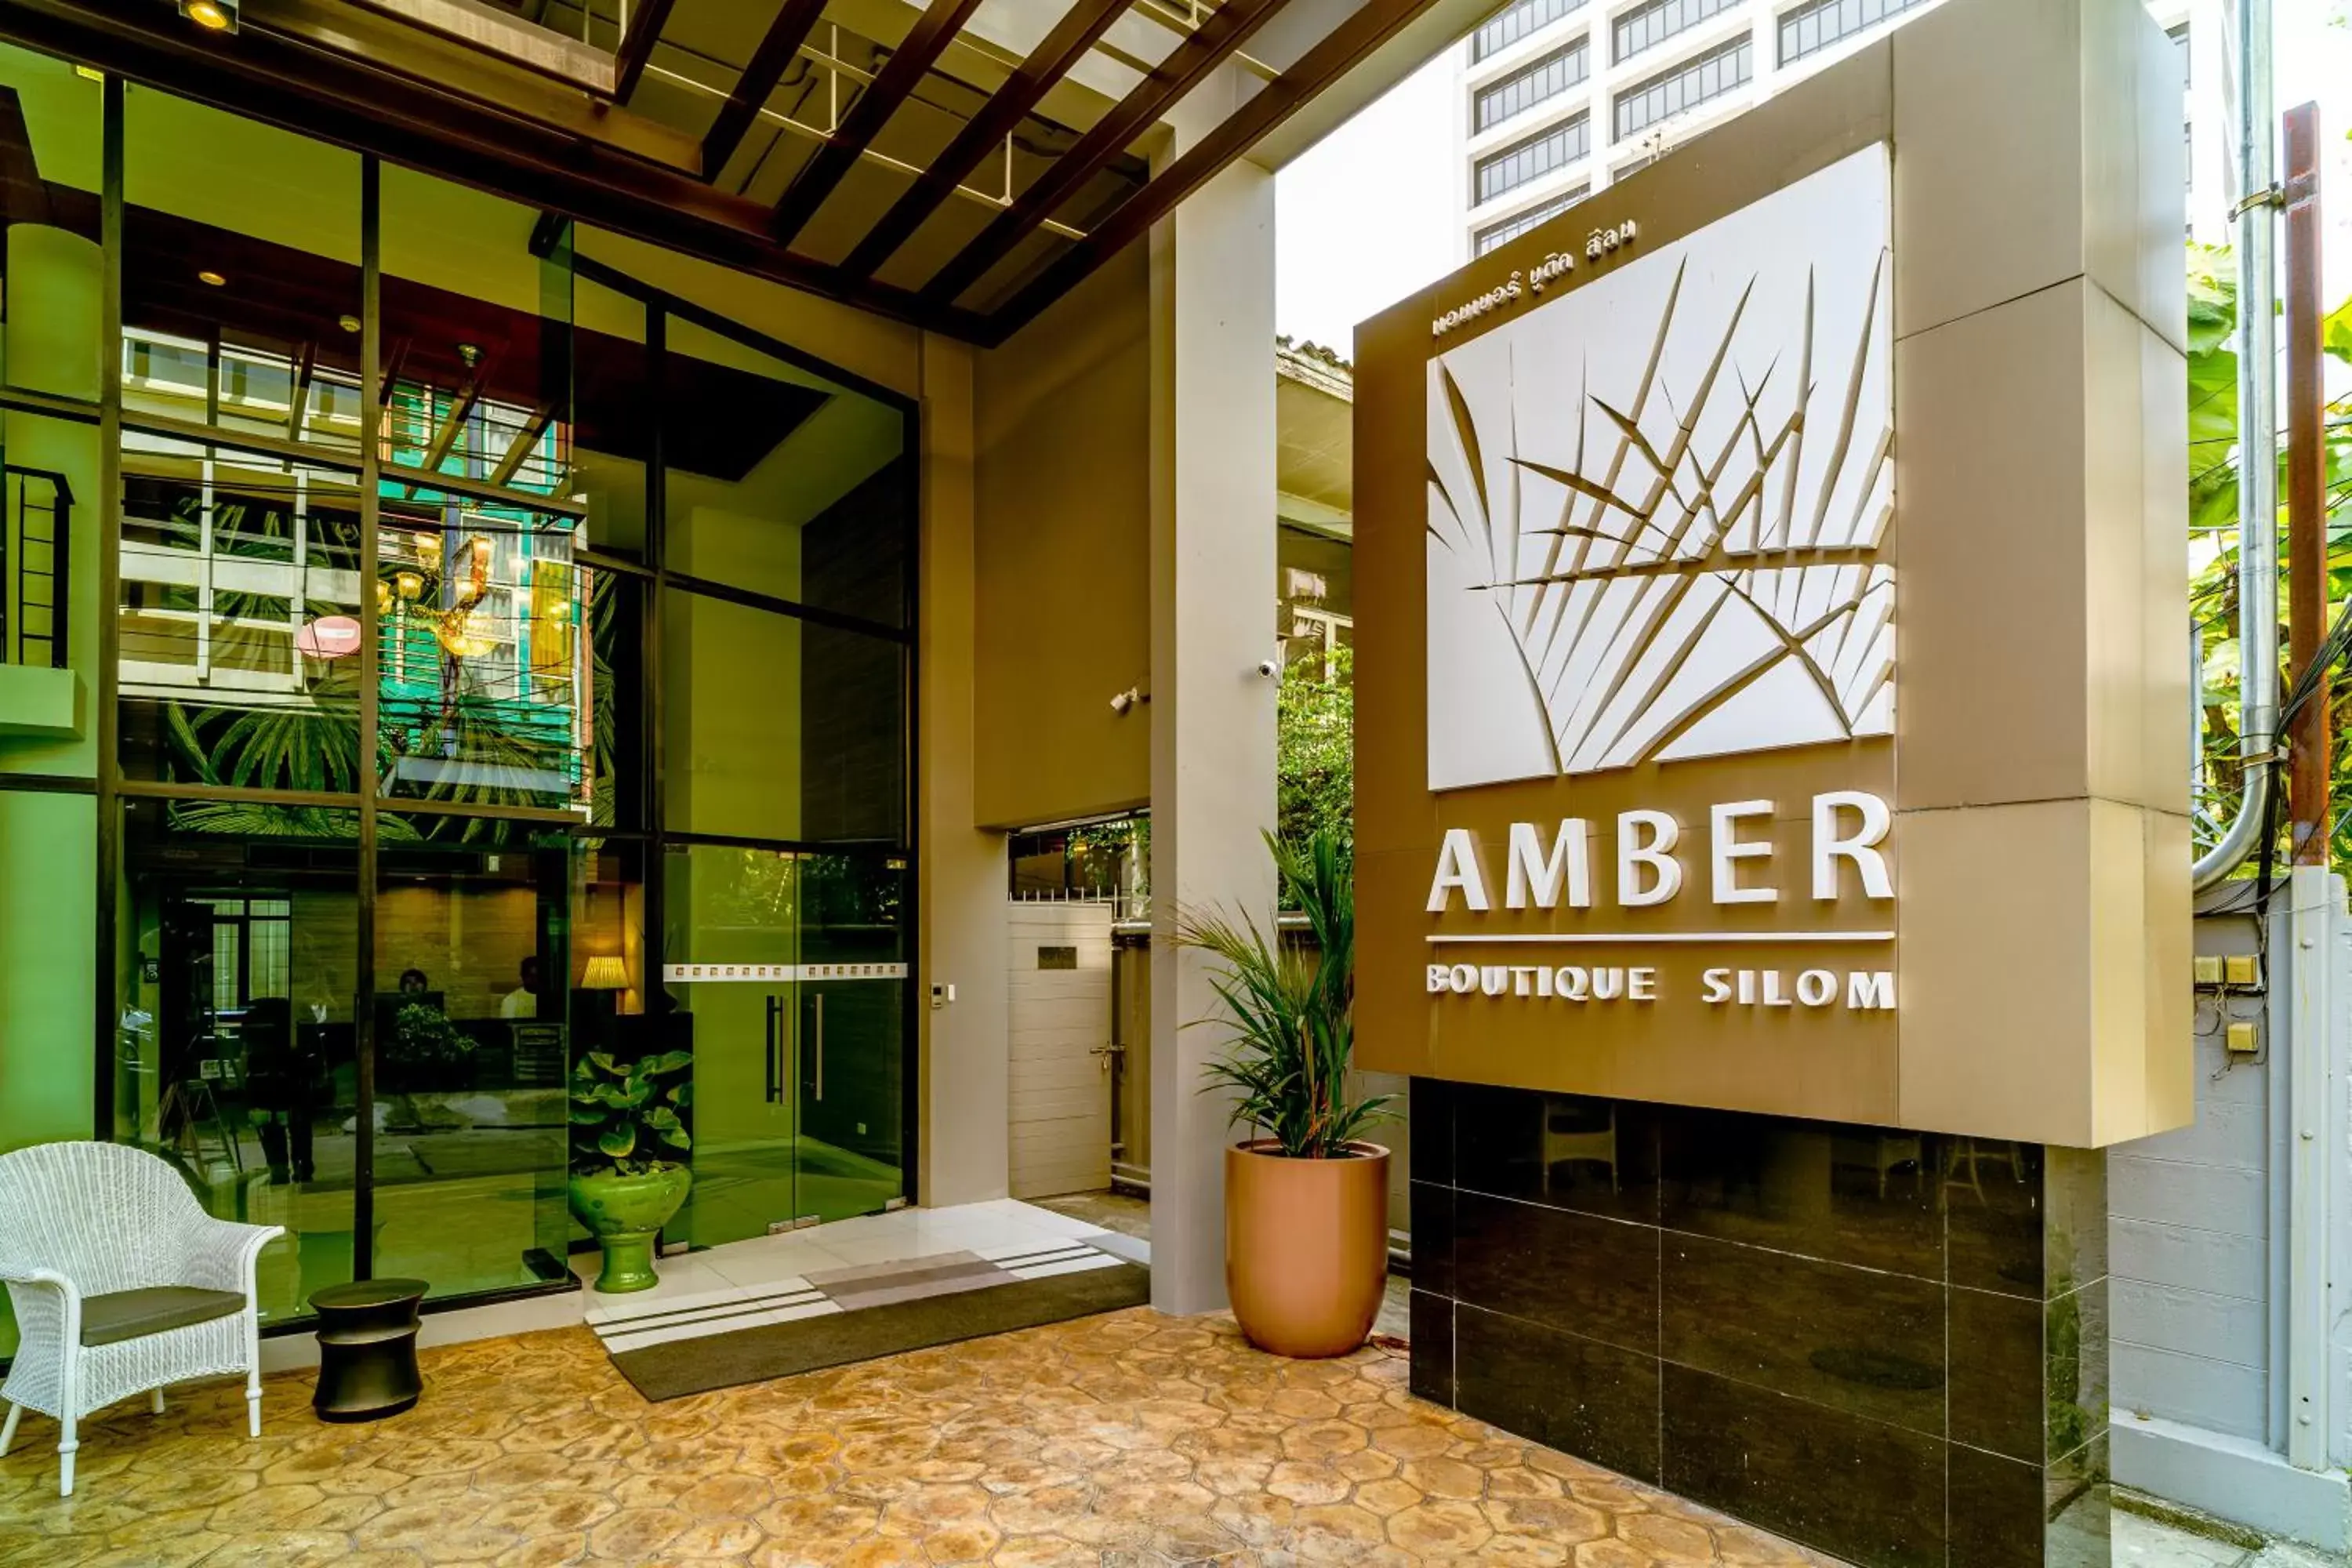 Property building in Amber Boutique Silom